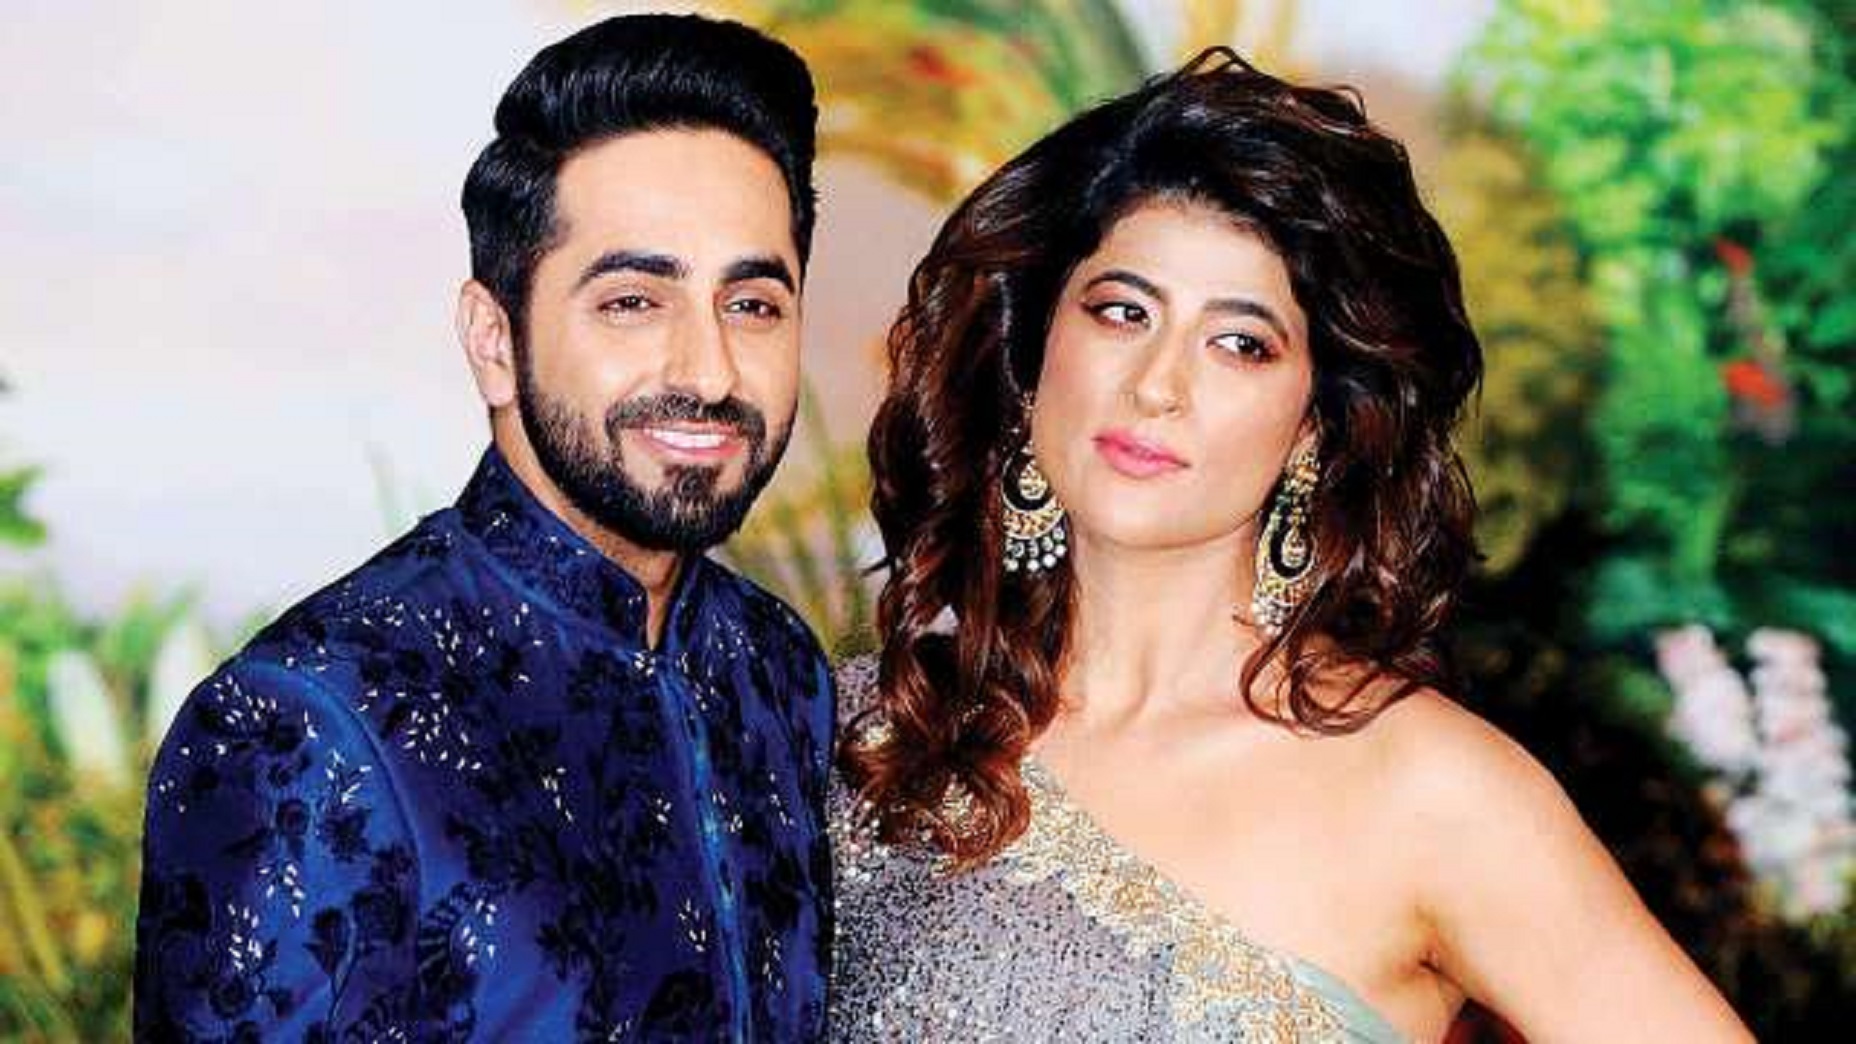 “It’s a Girl” – Ayushmann Khurrana’s Wife Welcomes Adorable New Member To the Family